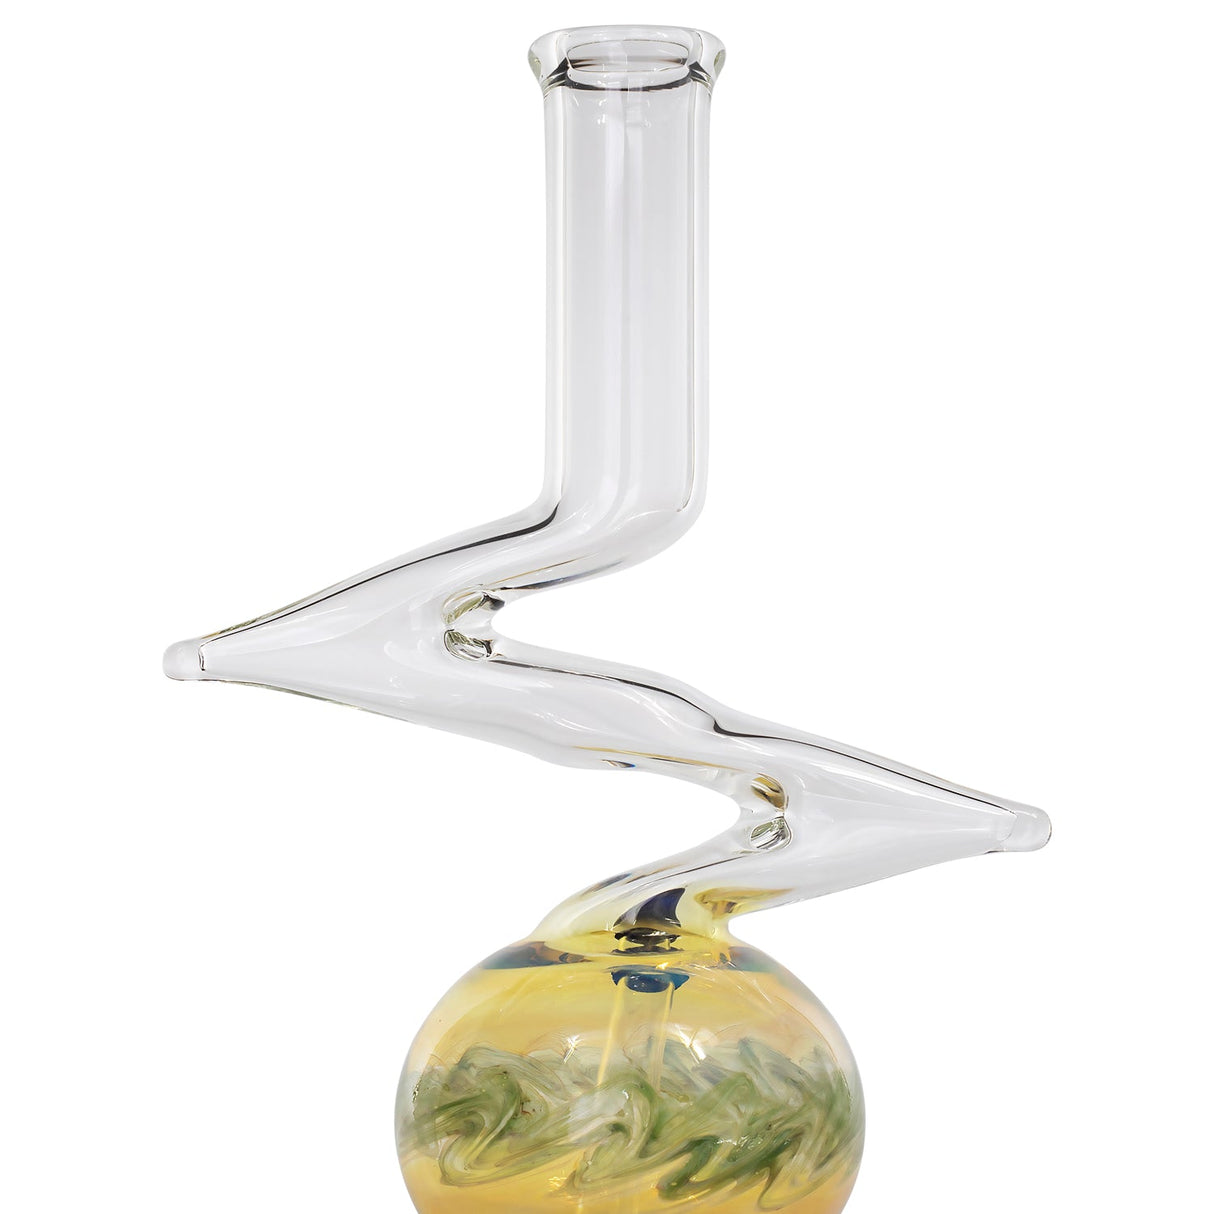 LA Pipes Zong-Bubble-Bong with unique zigzag design and clear borosilicate glass, front view